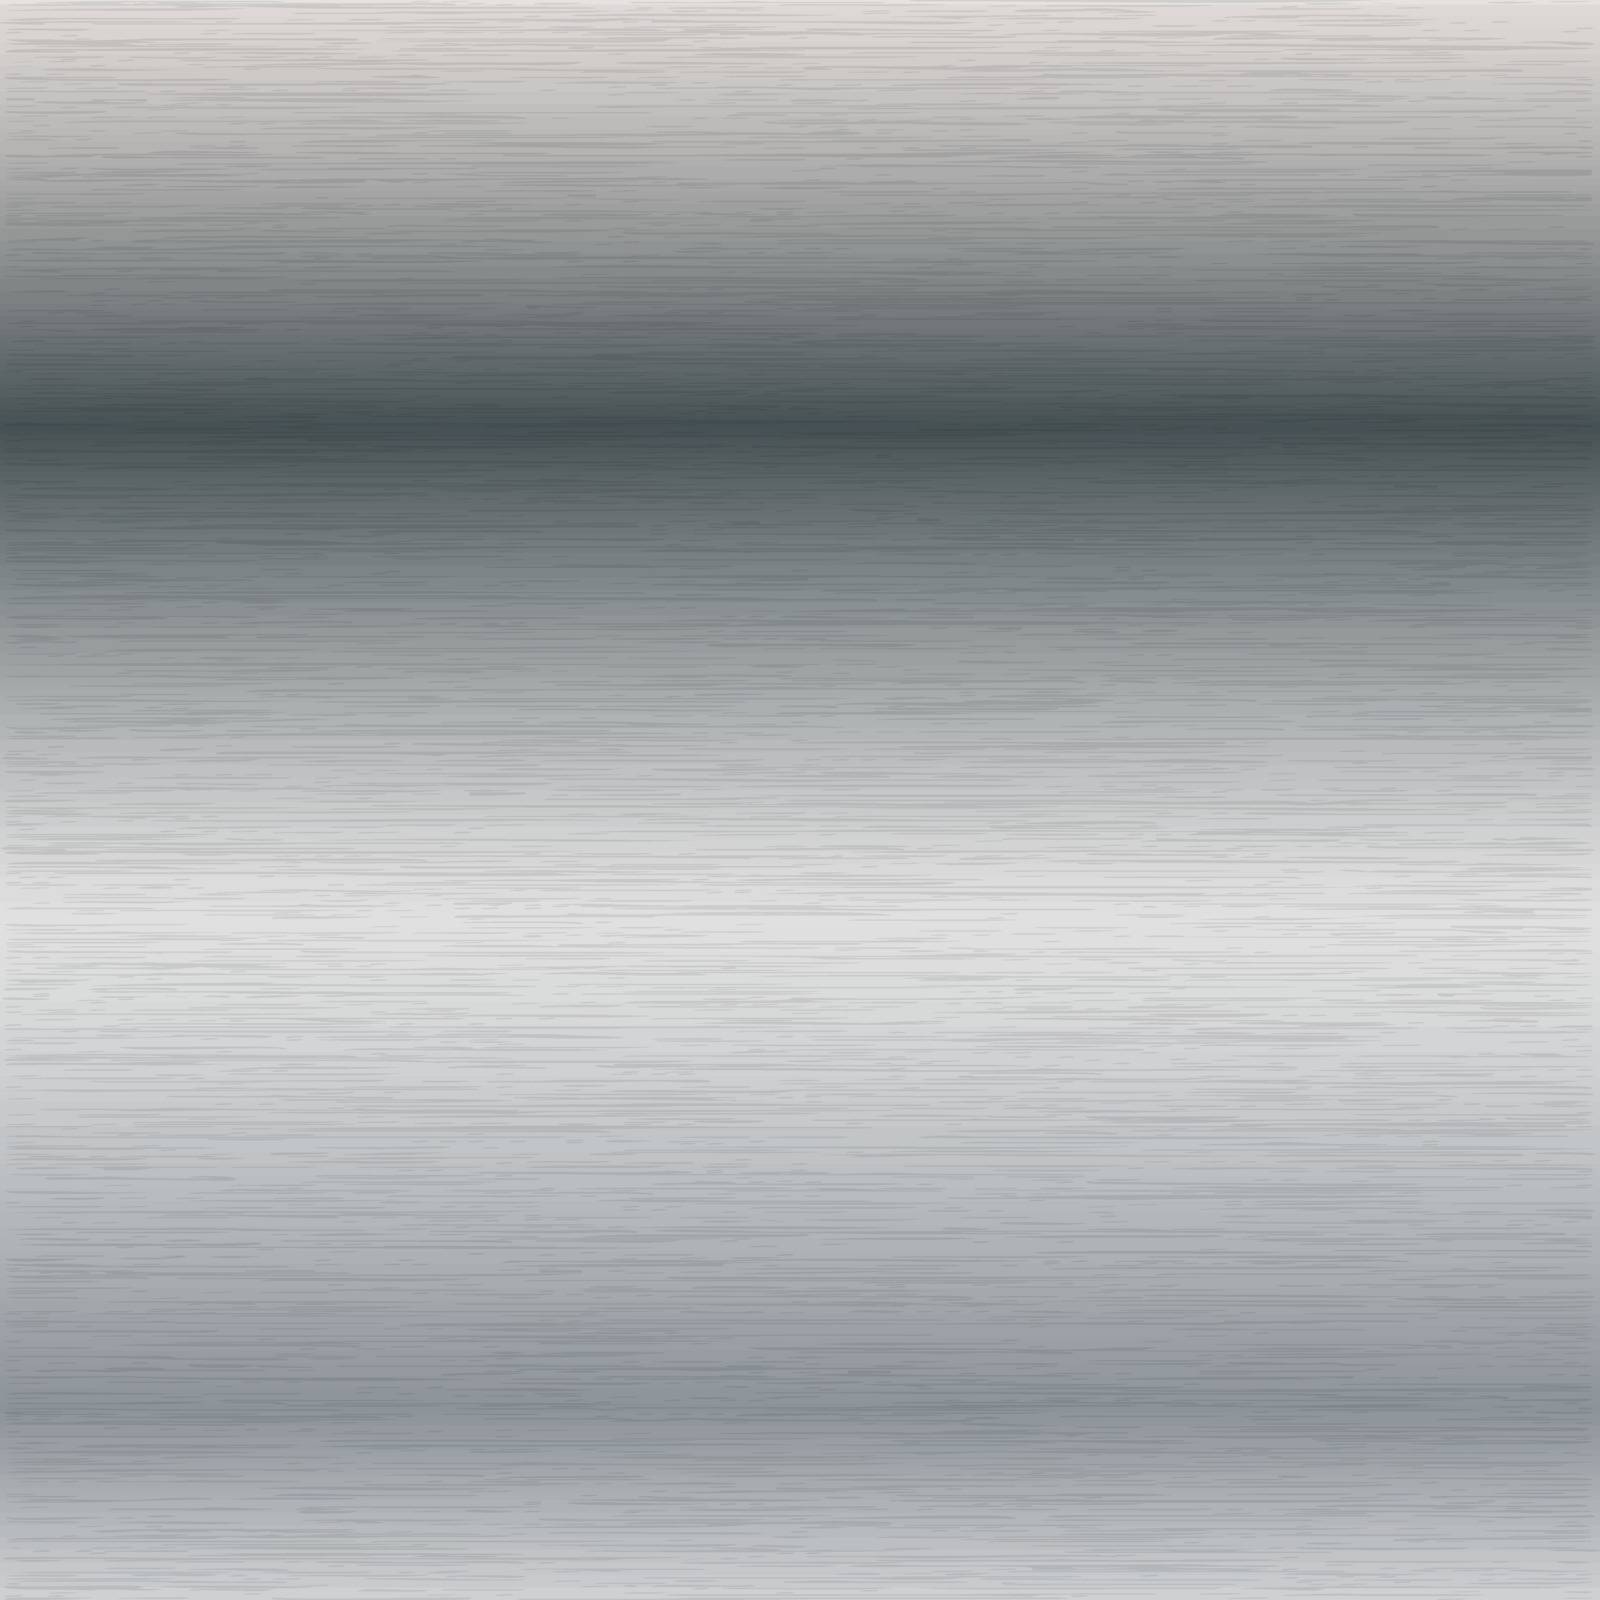 background or texture of brushed steel surface